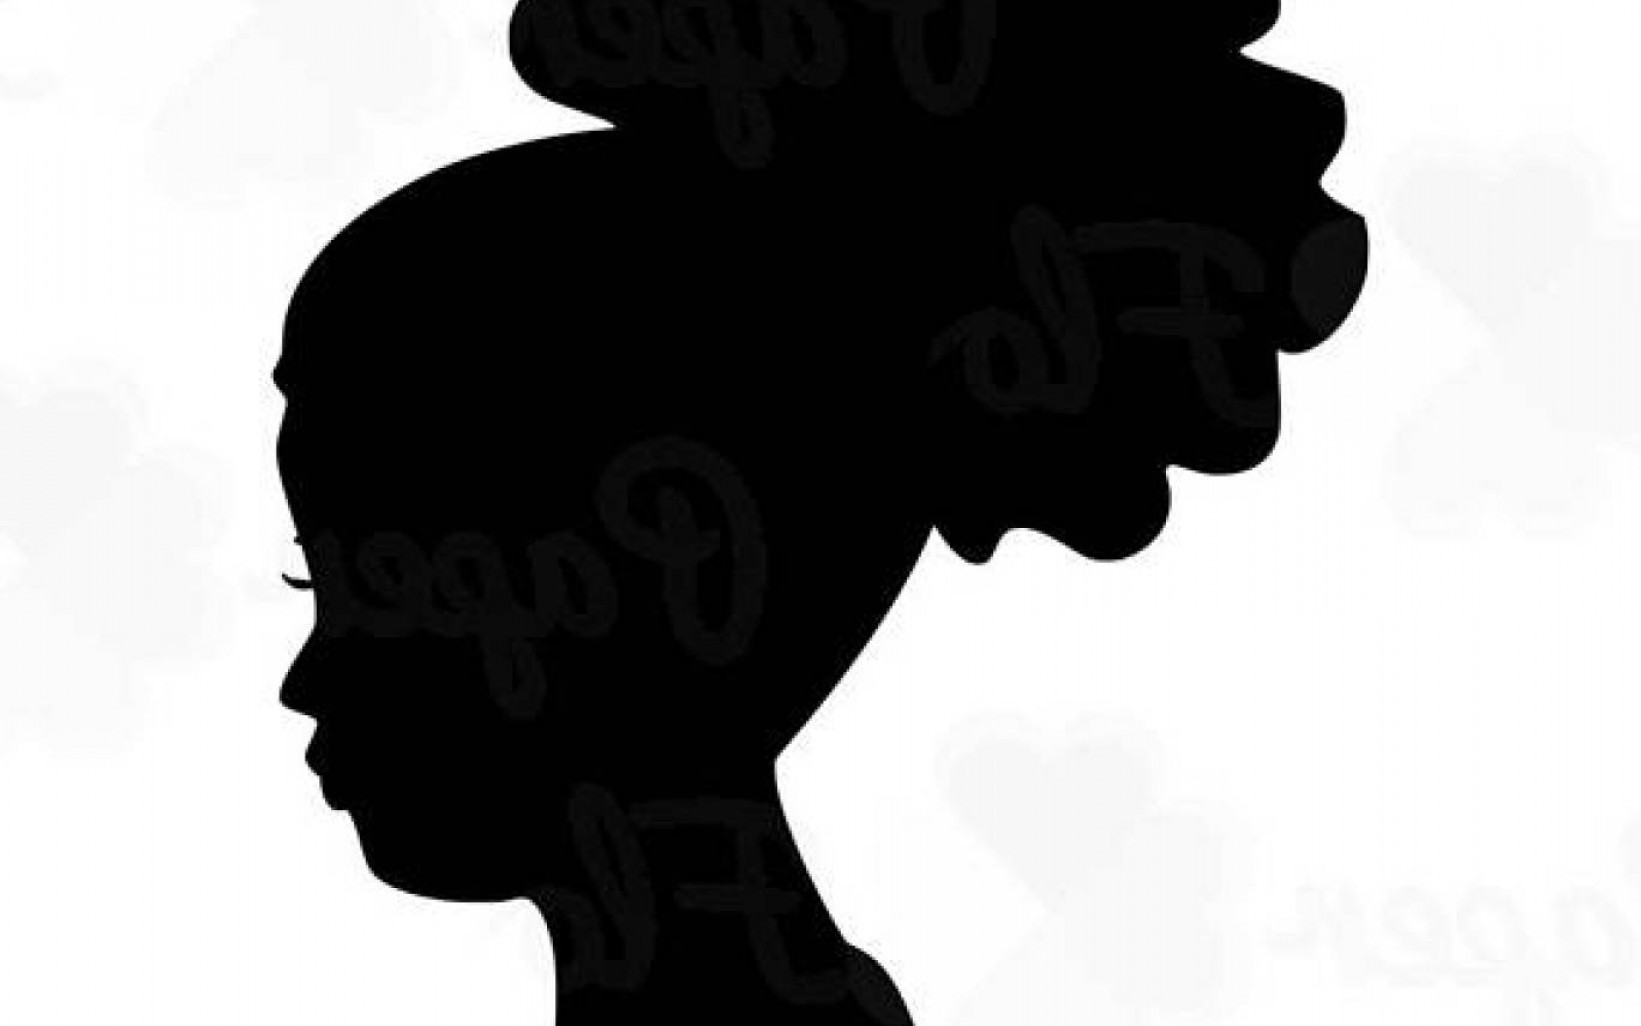 Afro clipart afro puffs, Afro afro puffs Transparent FREE ...